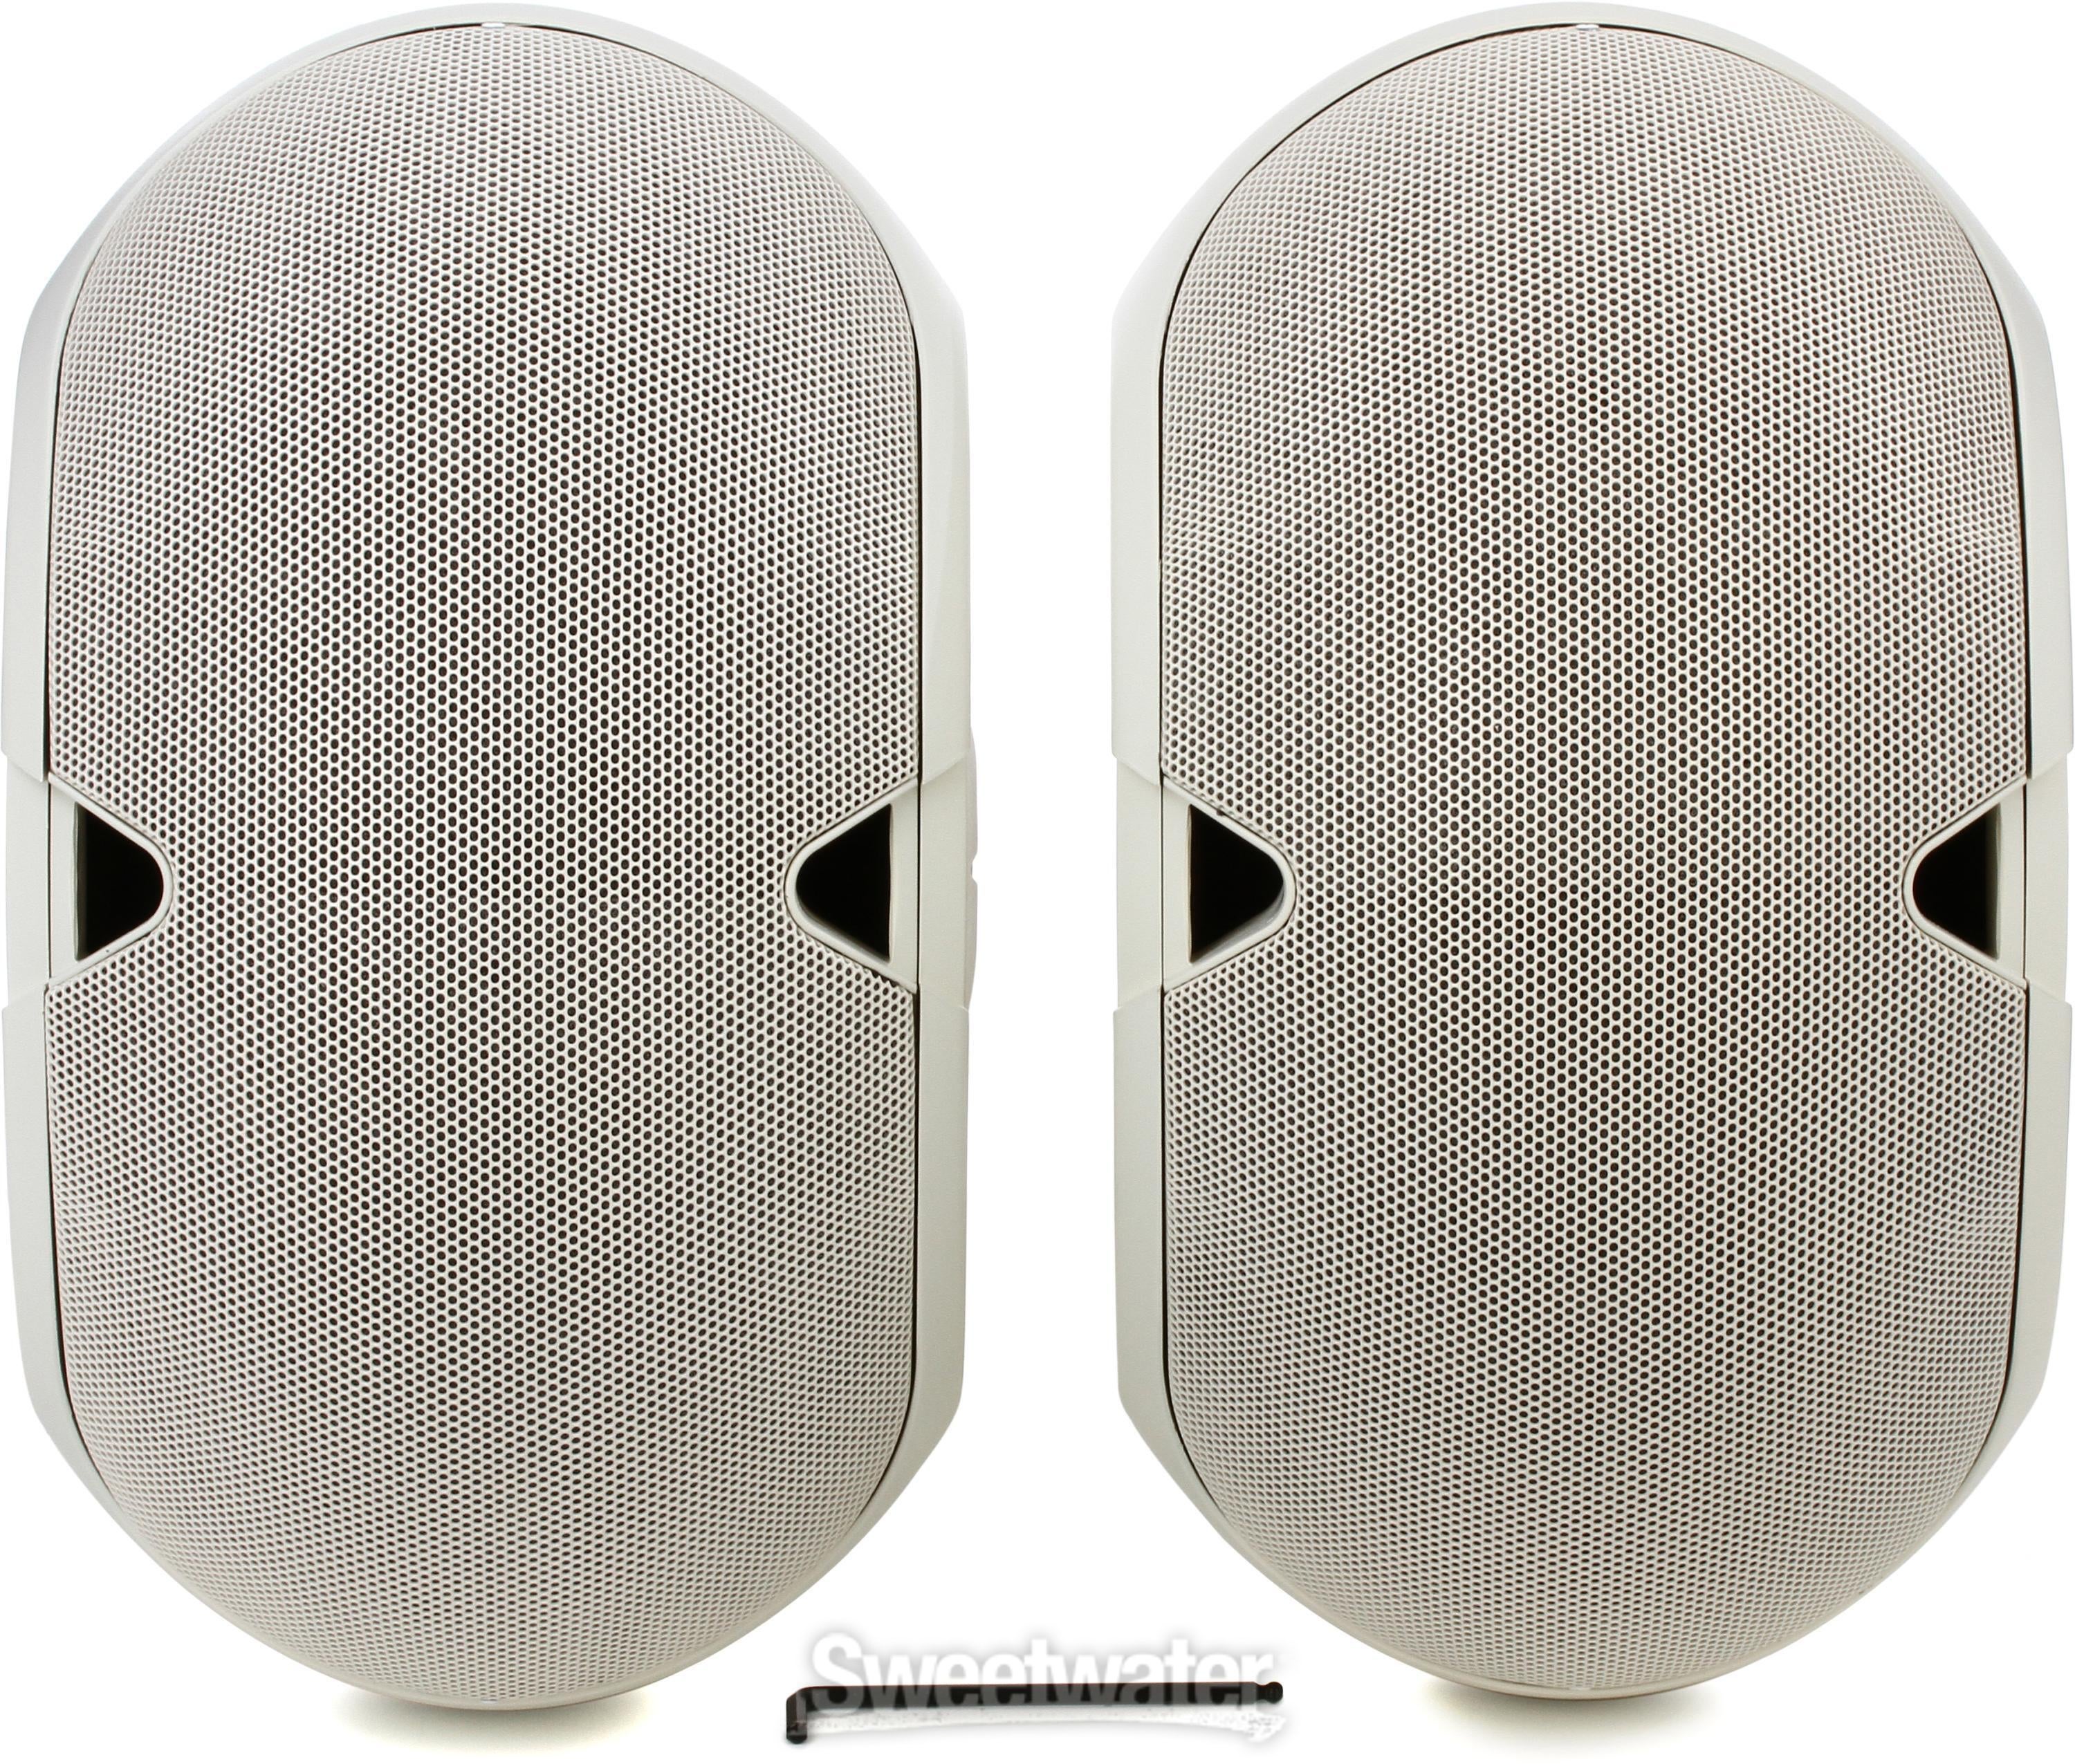 Electro-Voice EVID 6.2 300W Dual 6 inch Install Speaker - White (pair)